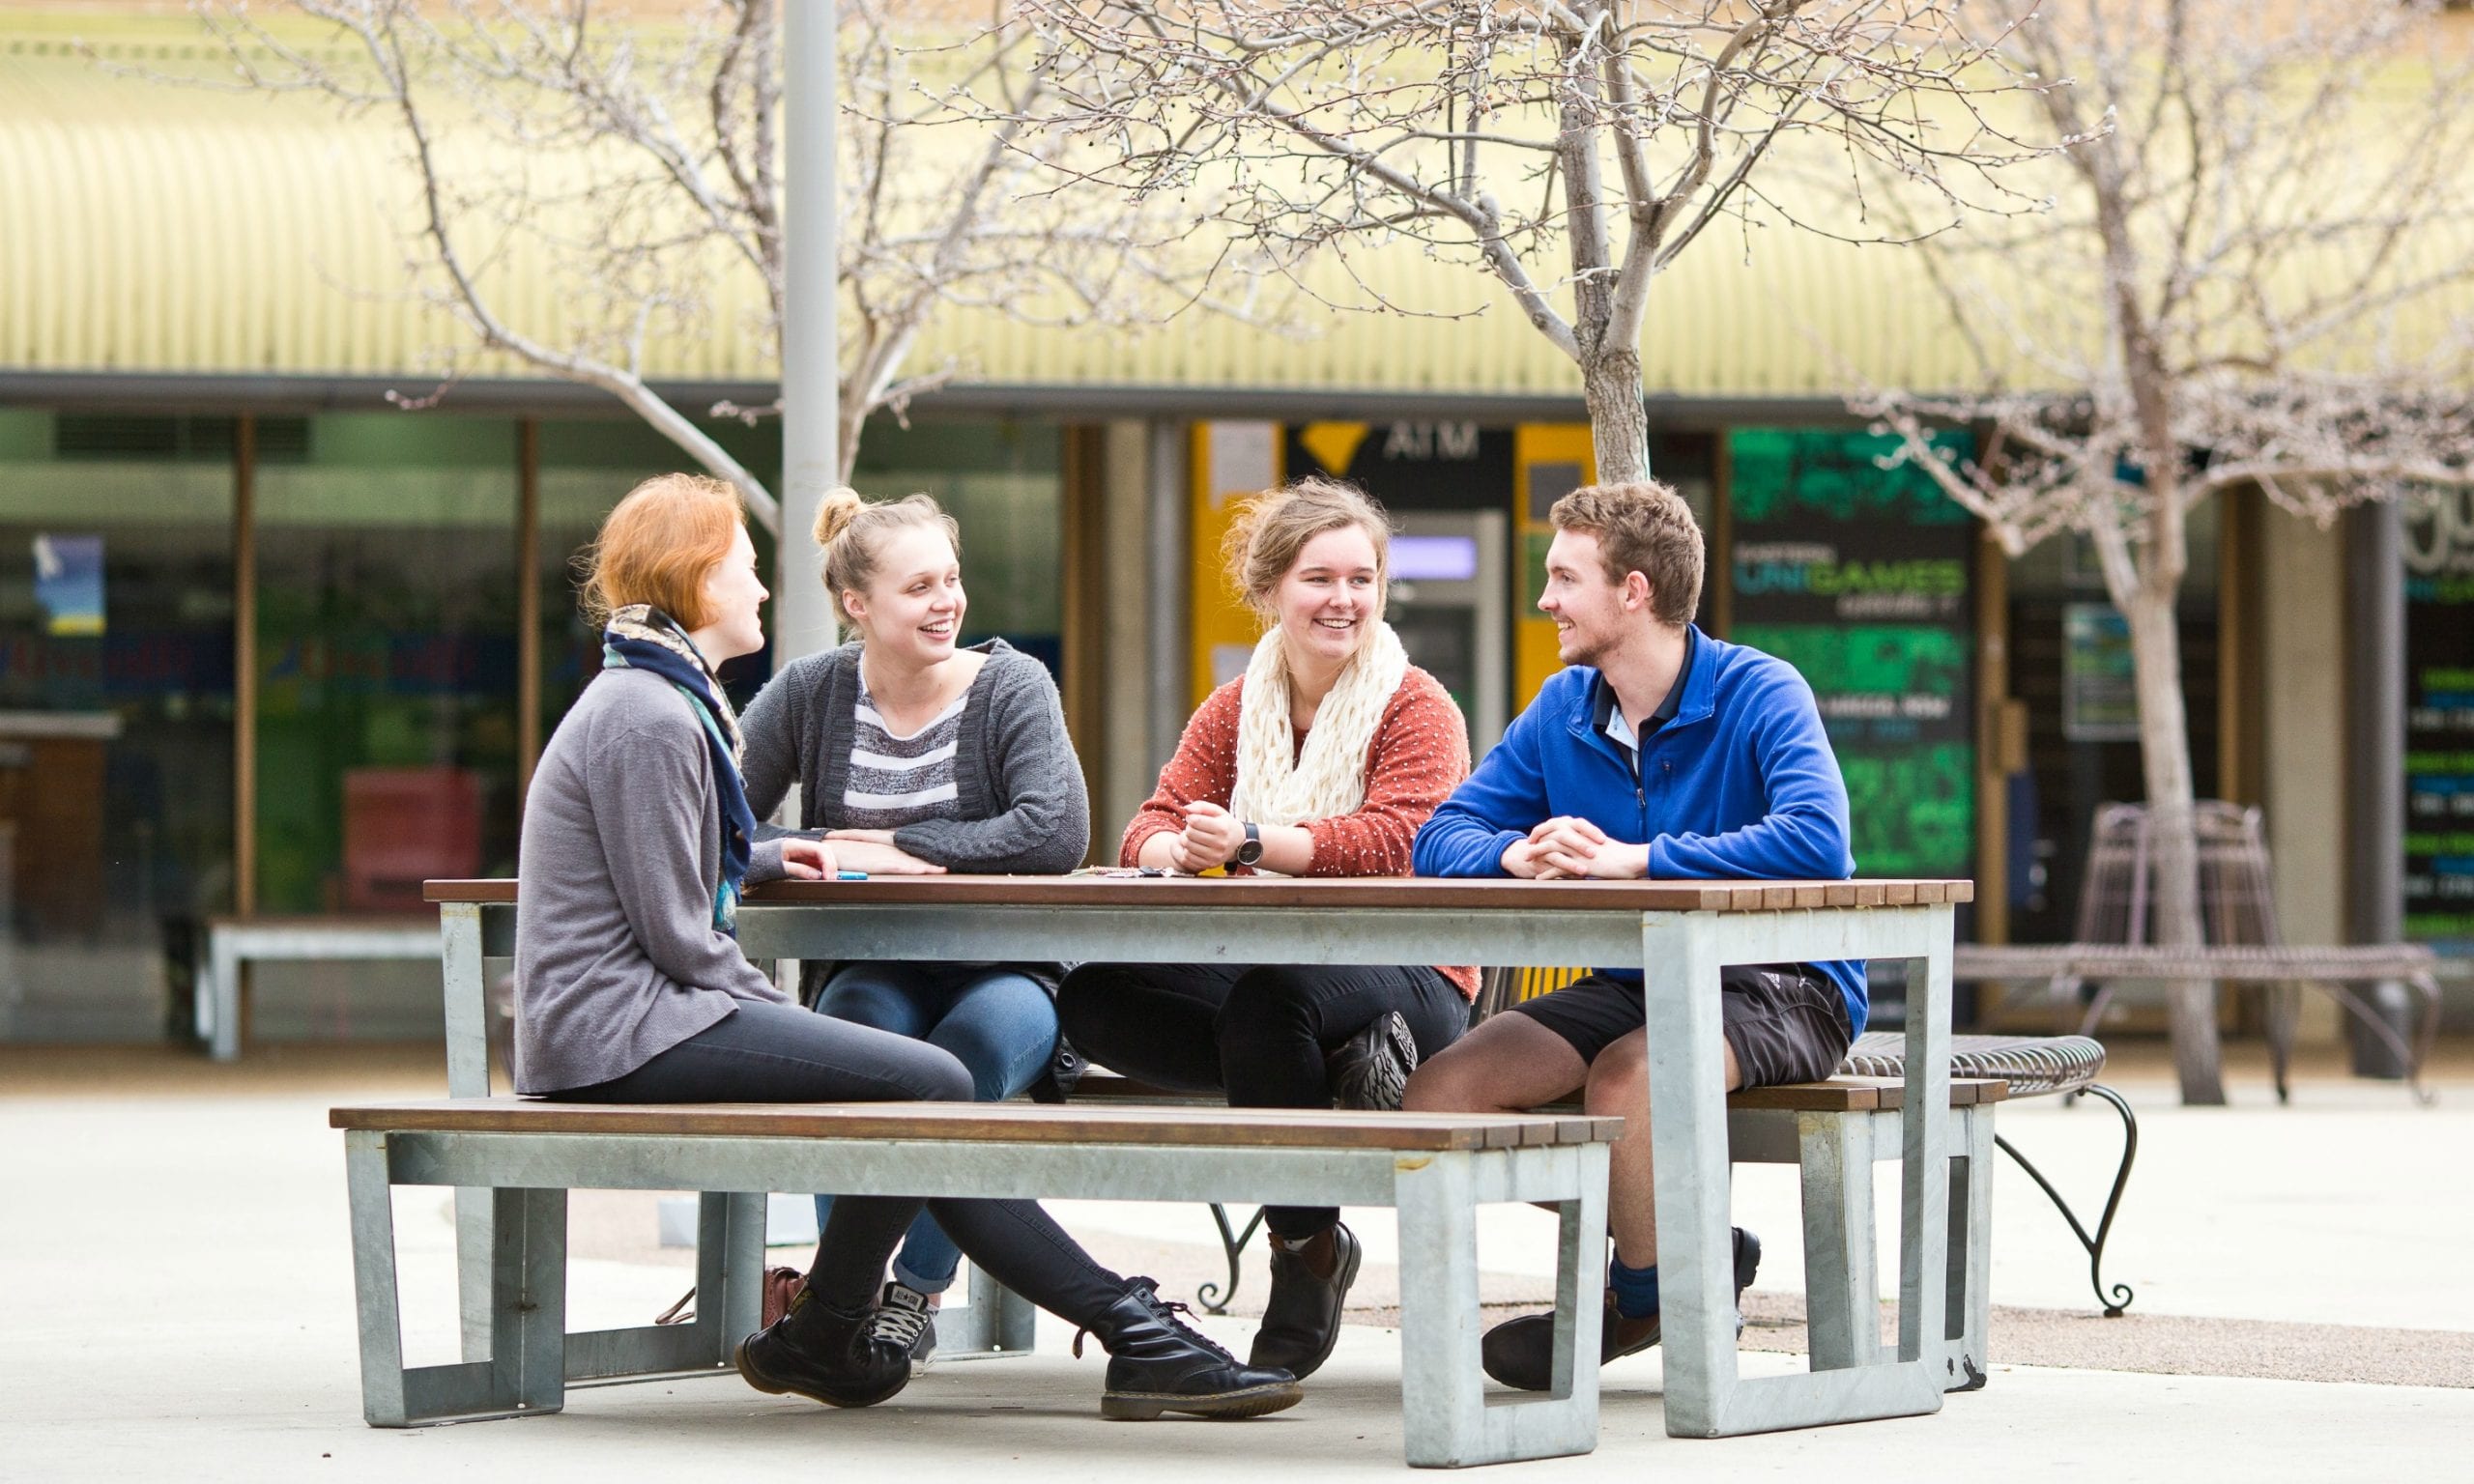 CSU students in Wagga Wagga sit and eat in the cafe eating area.